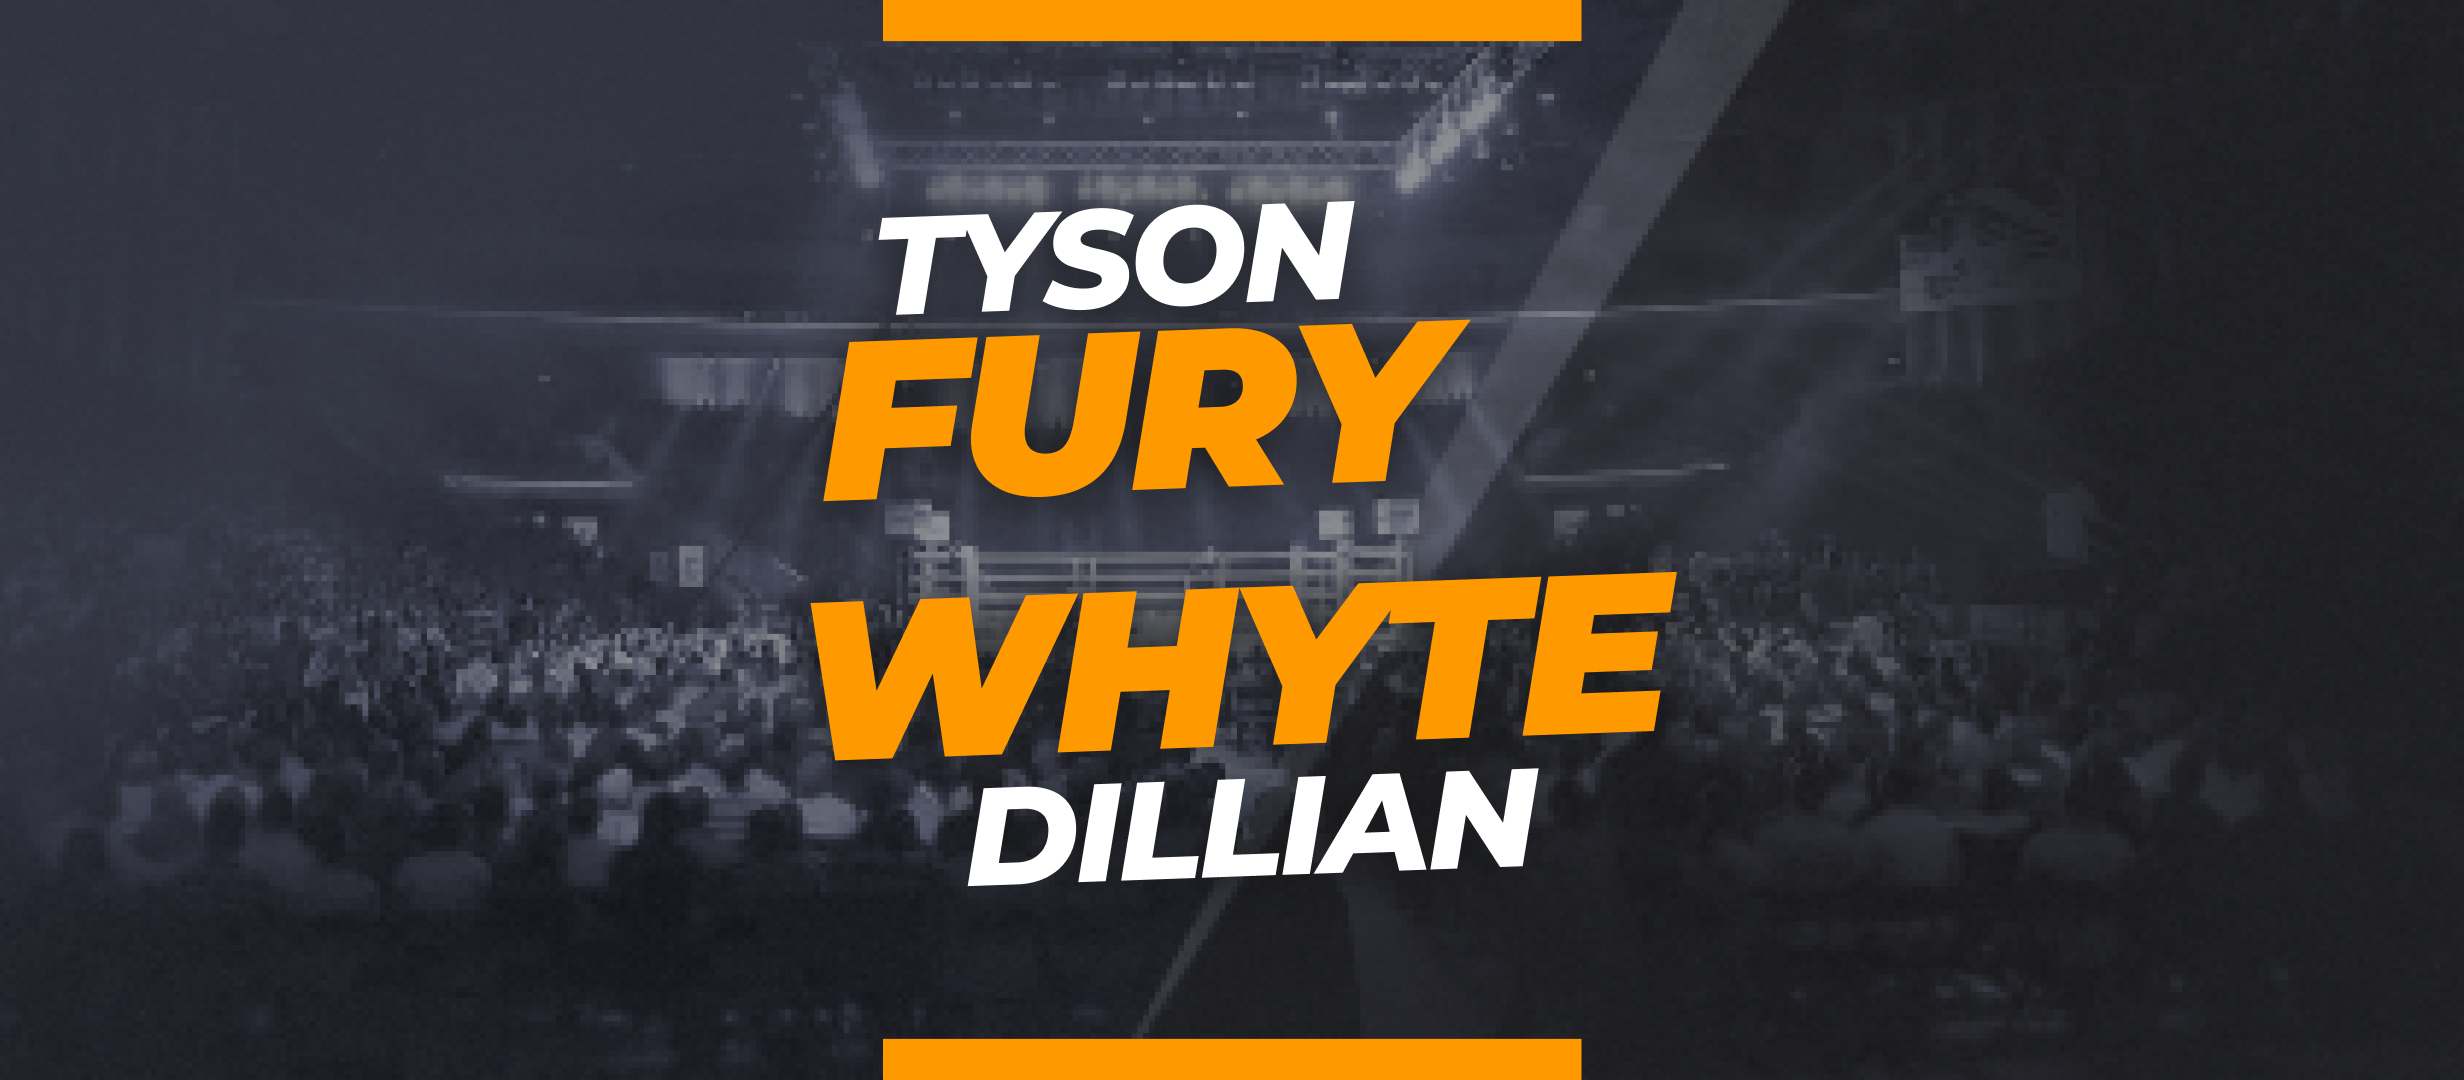 Tyson Fury vs Dillian Whyte betting odd, tips, predictions for the fight 23rd of April 2022